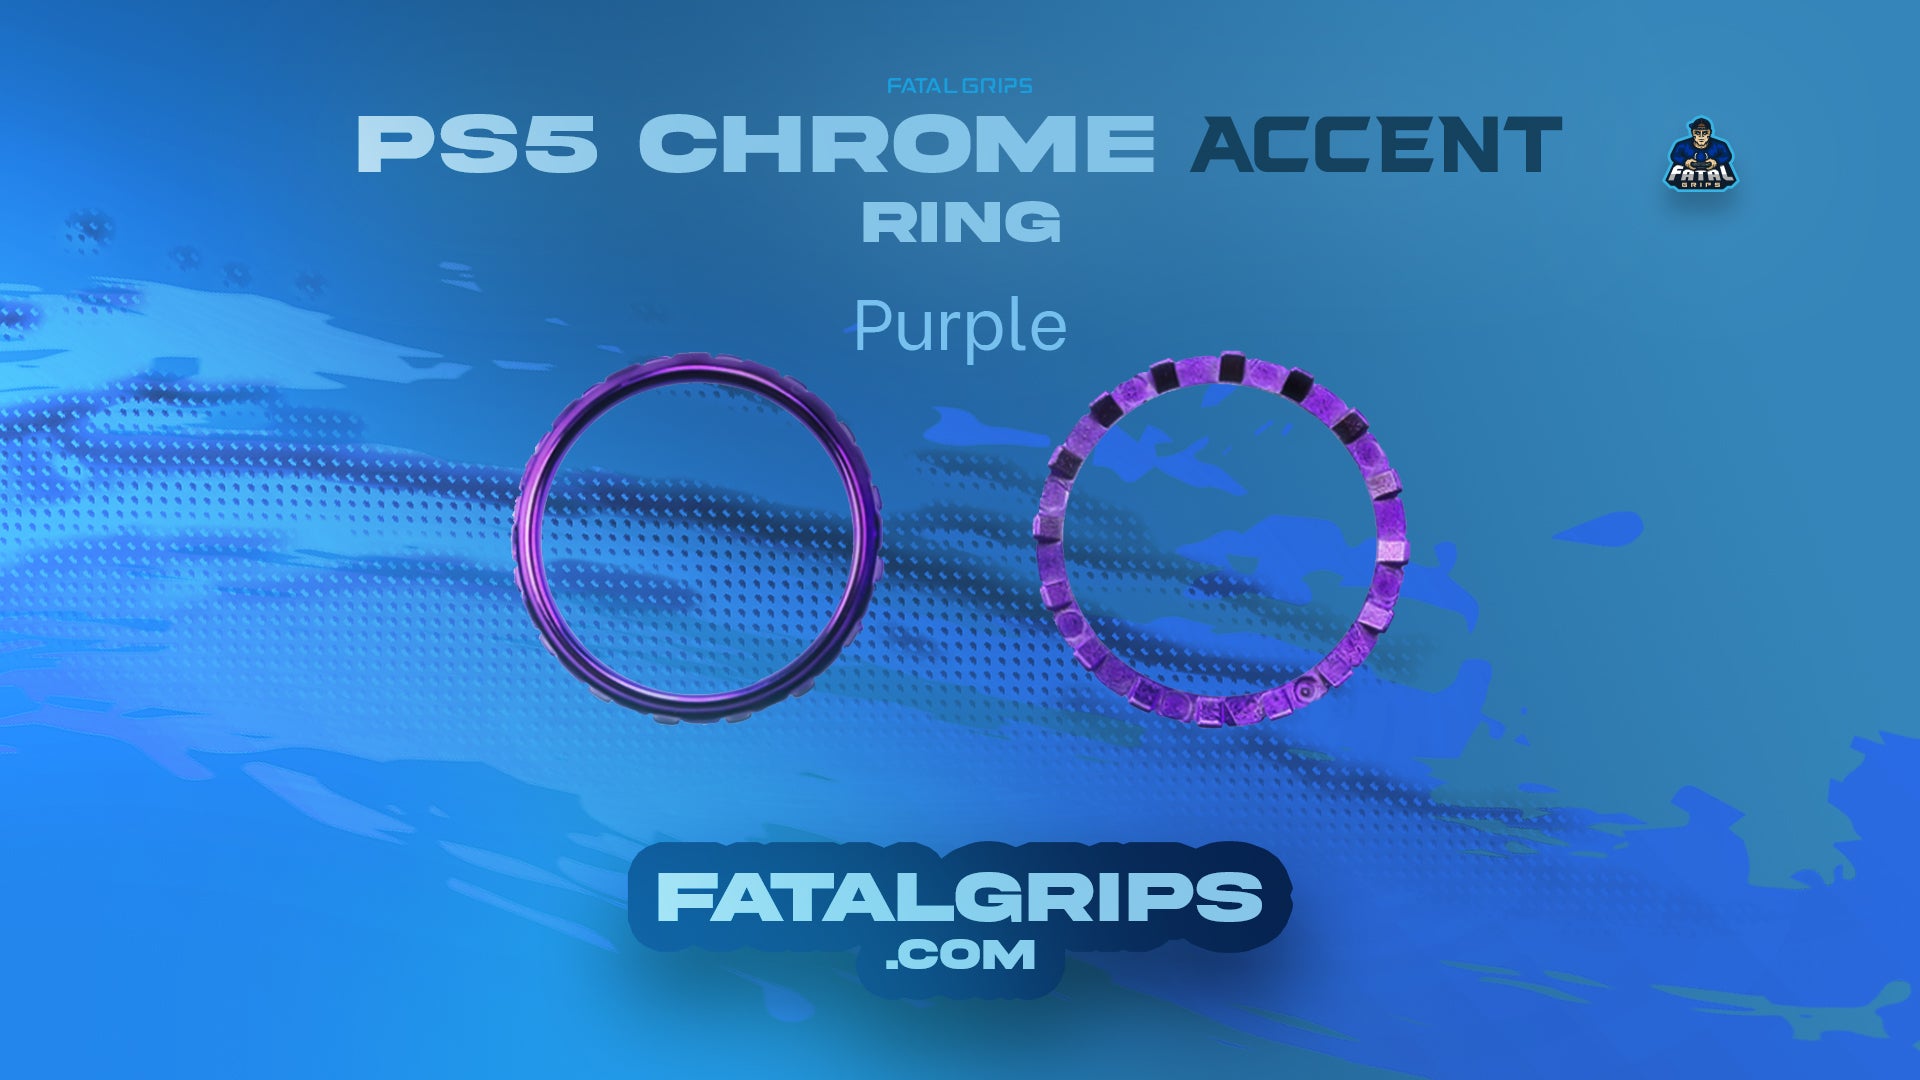 PS5 Chrome Accent Rings